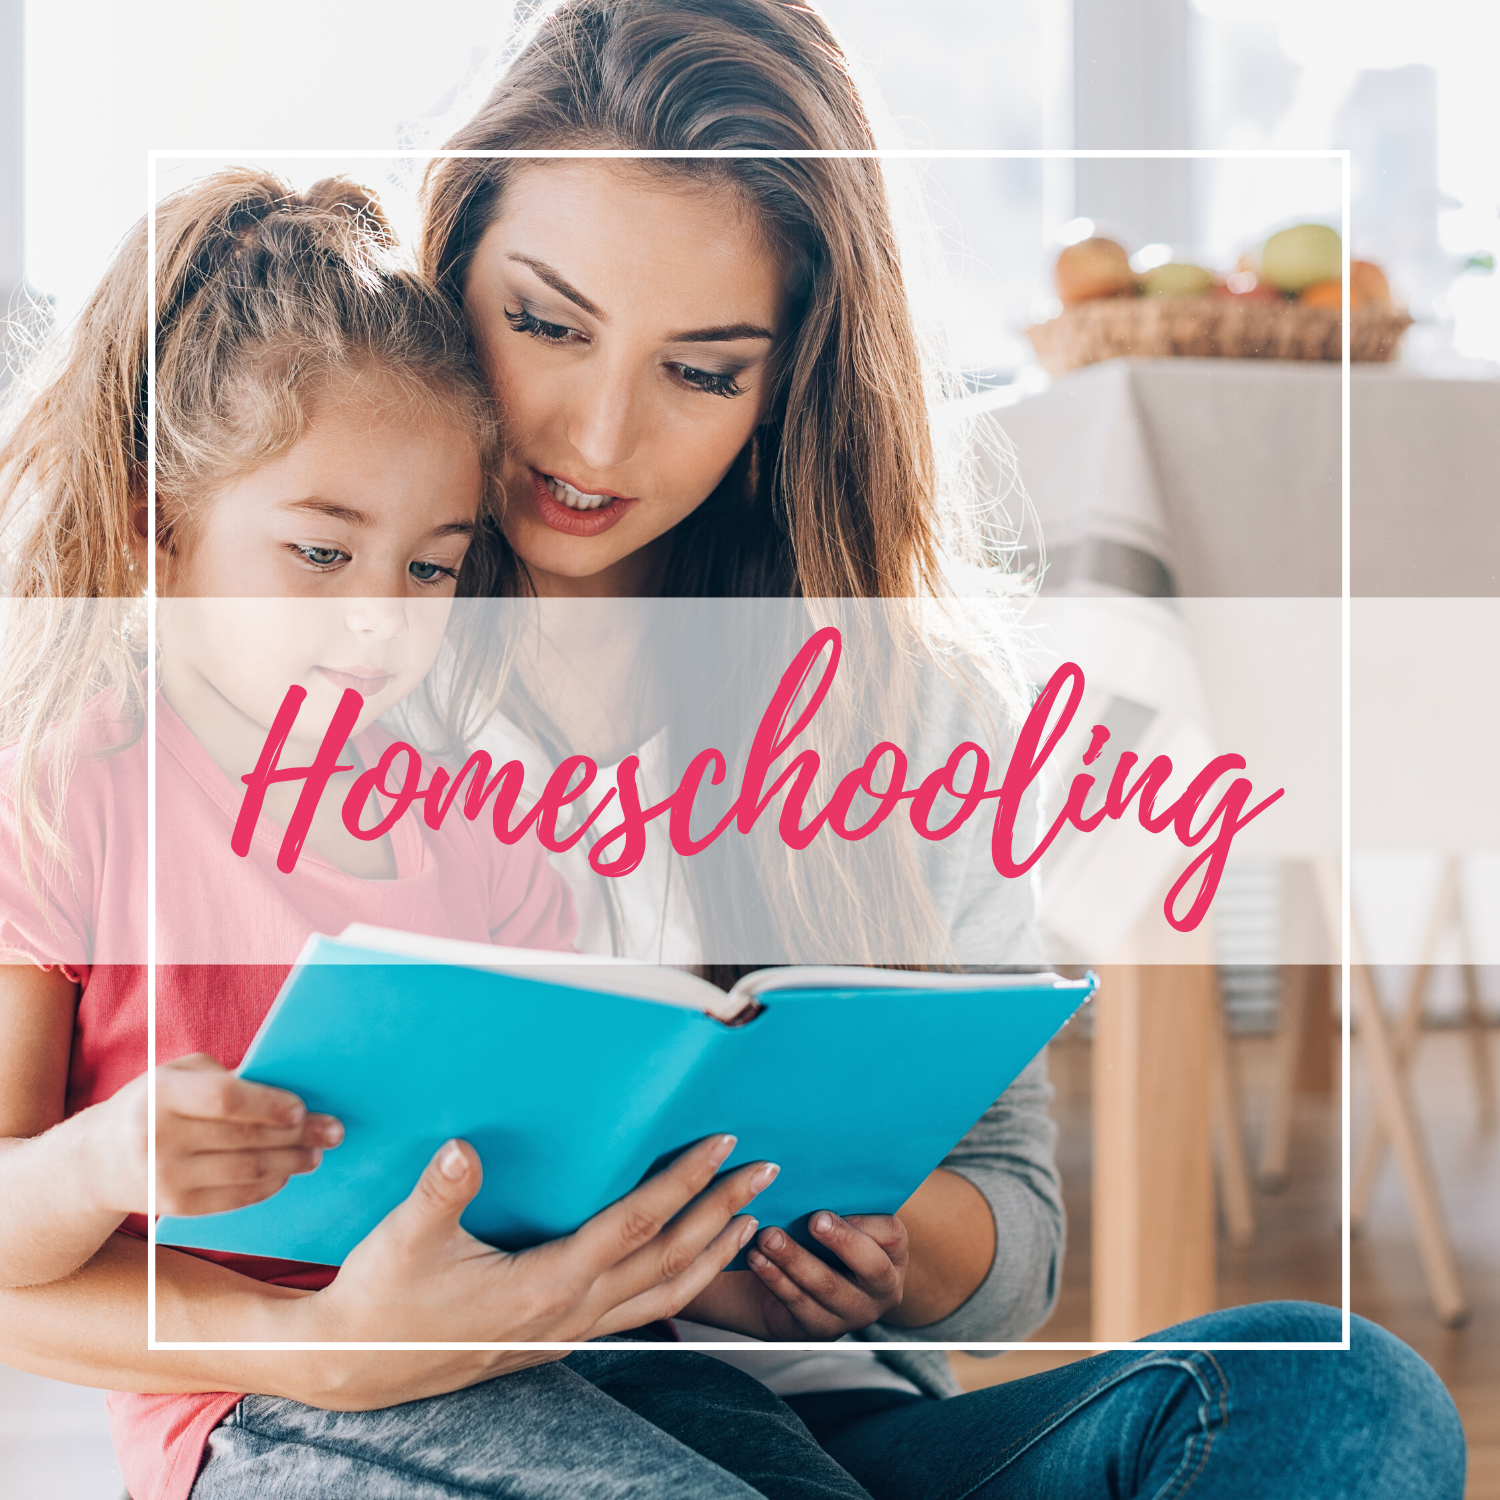 Homeschooling help for you to raise kids who love the Lord and succeed, as a Busy Mom